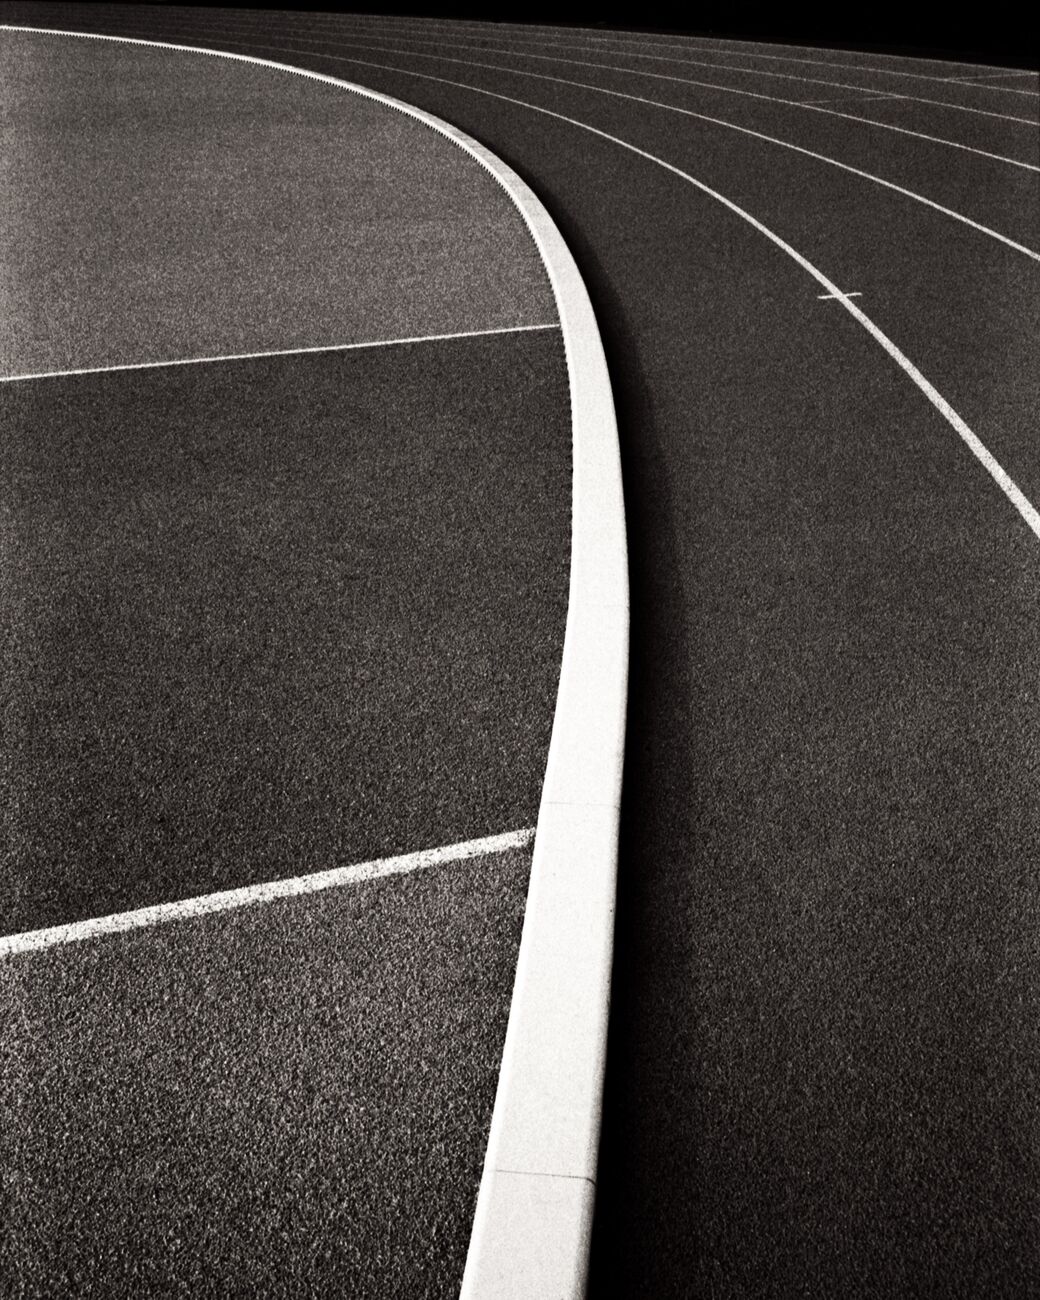 Get a 7.2 x 9.1 in, Running Track. Ref-11621-2 - Denis Olivier Photography